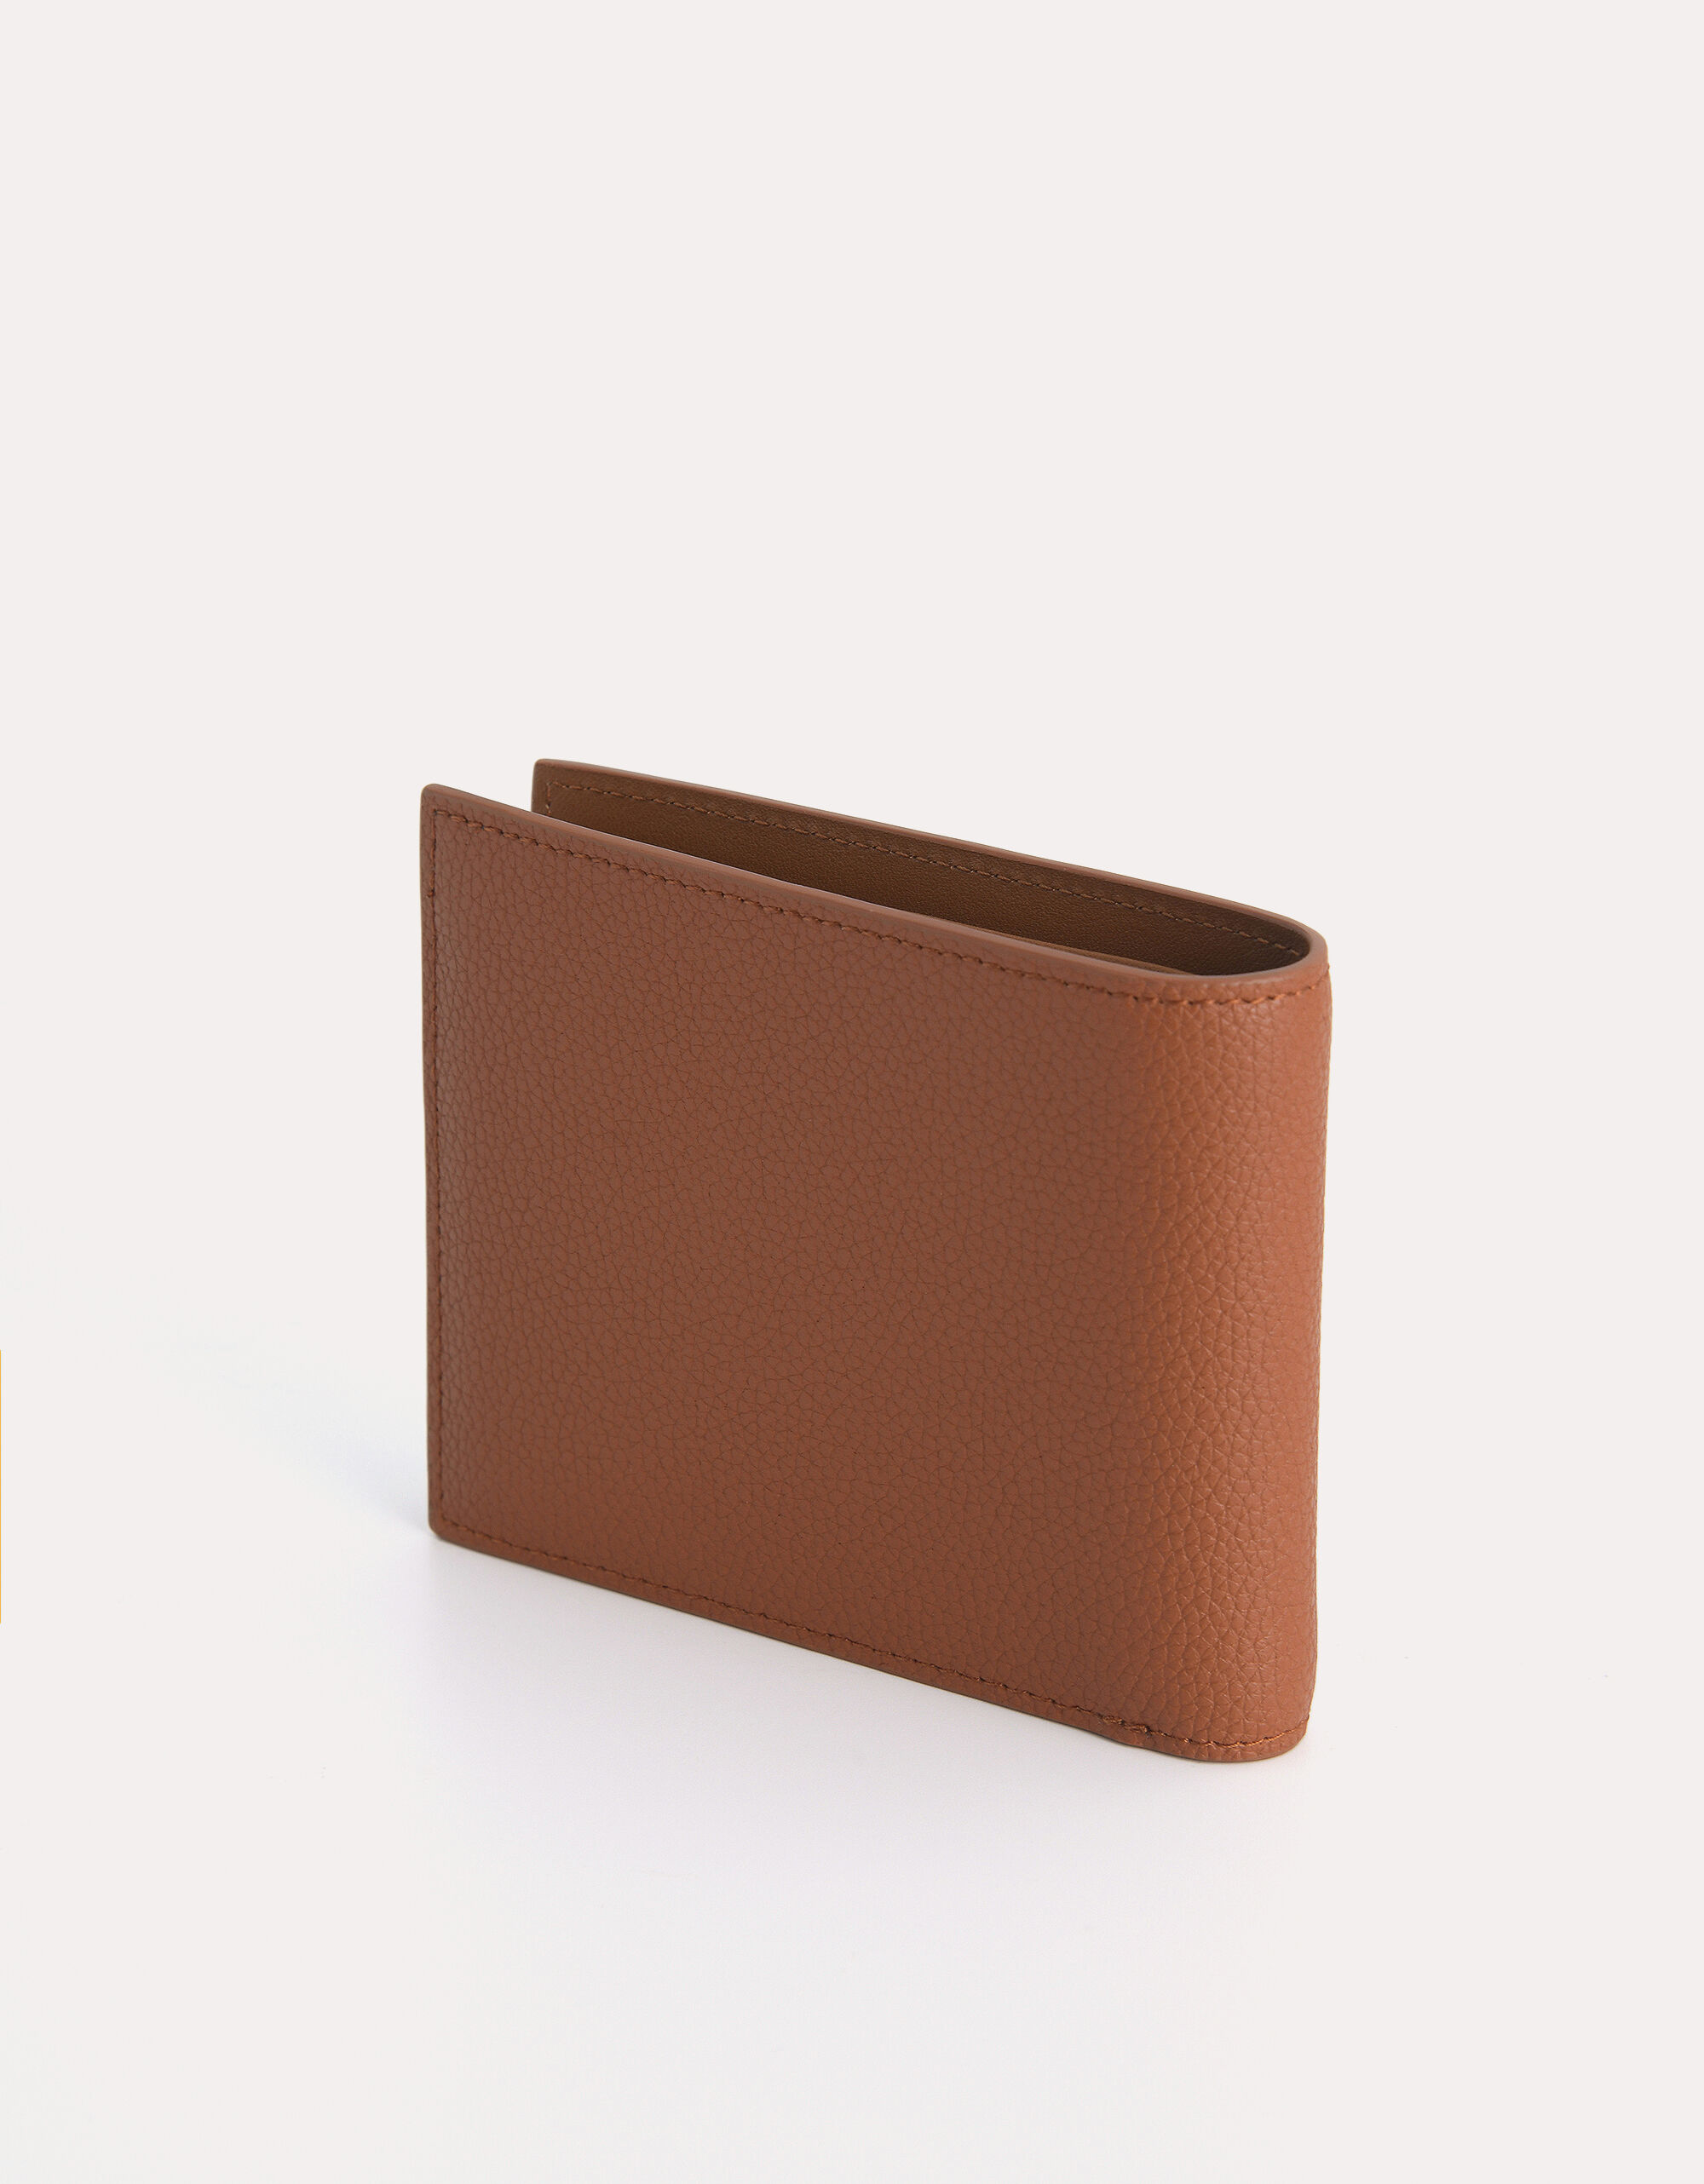 Textured Leather Bi-Fold Wallet with Insert - PEDRO SG